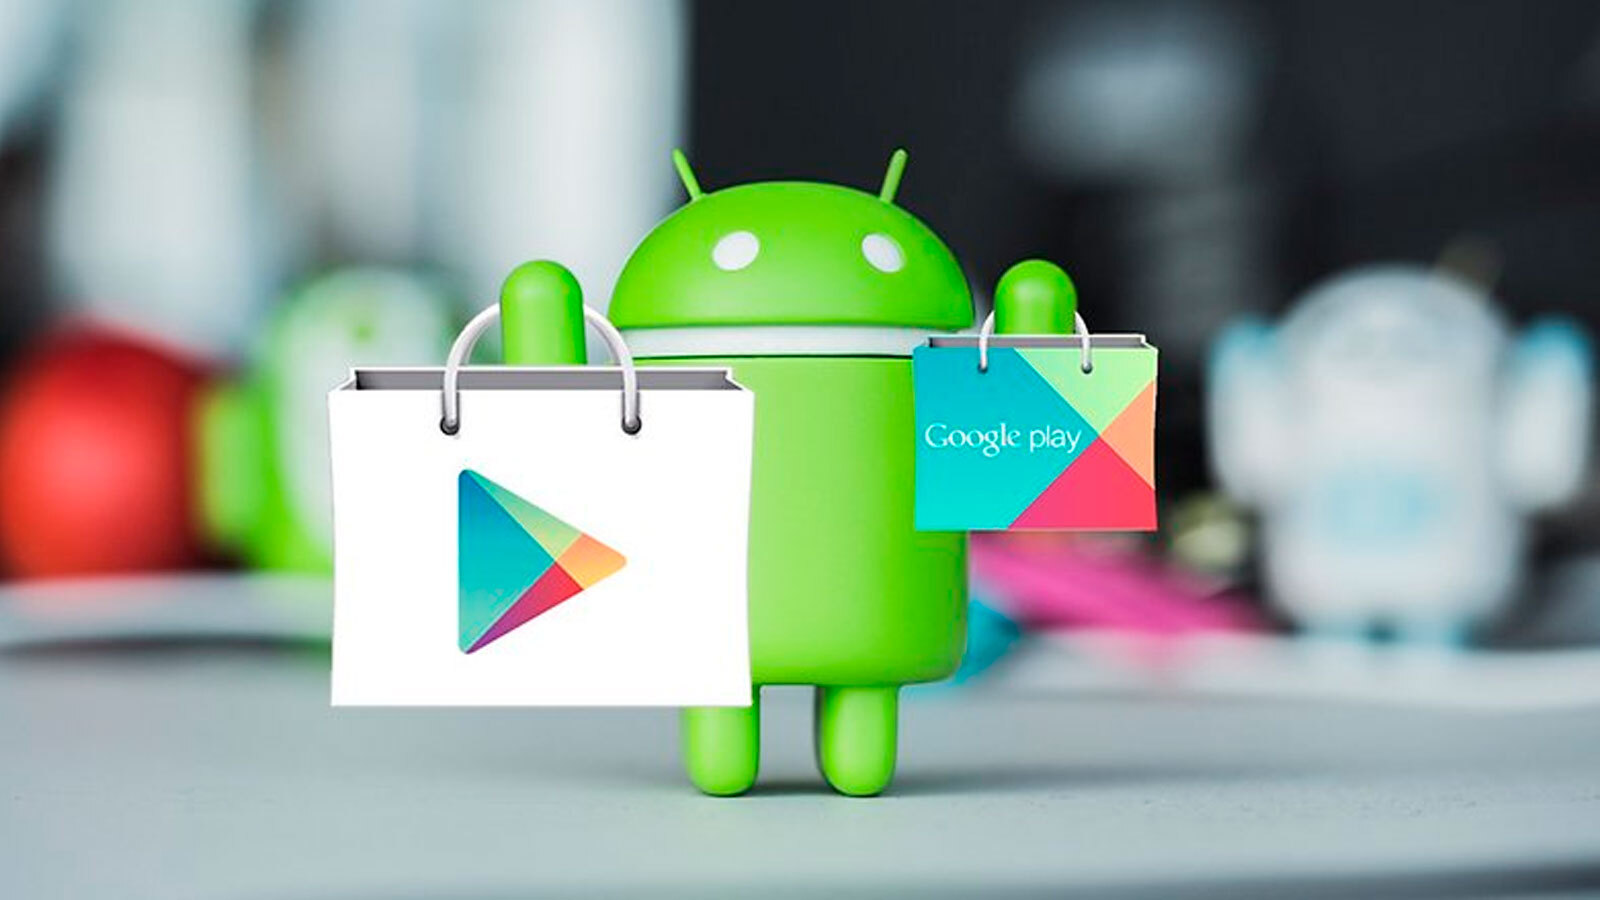     android  google play  